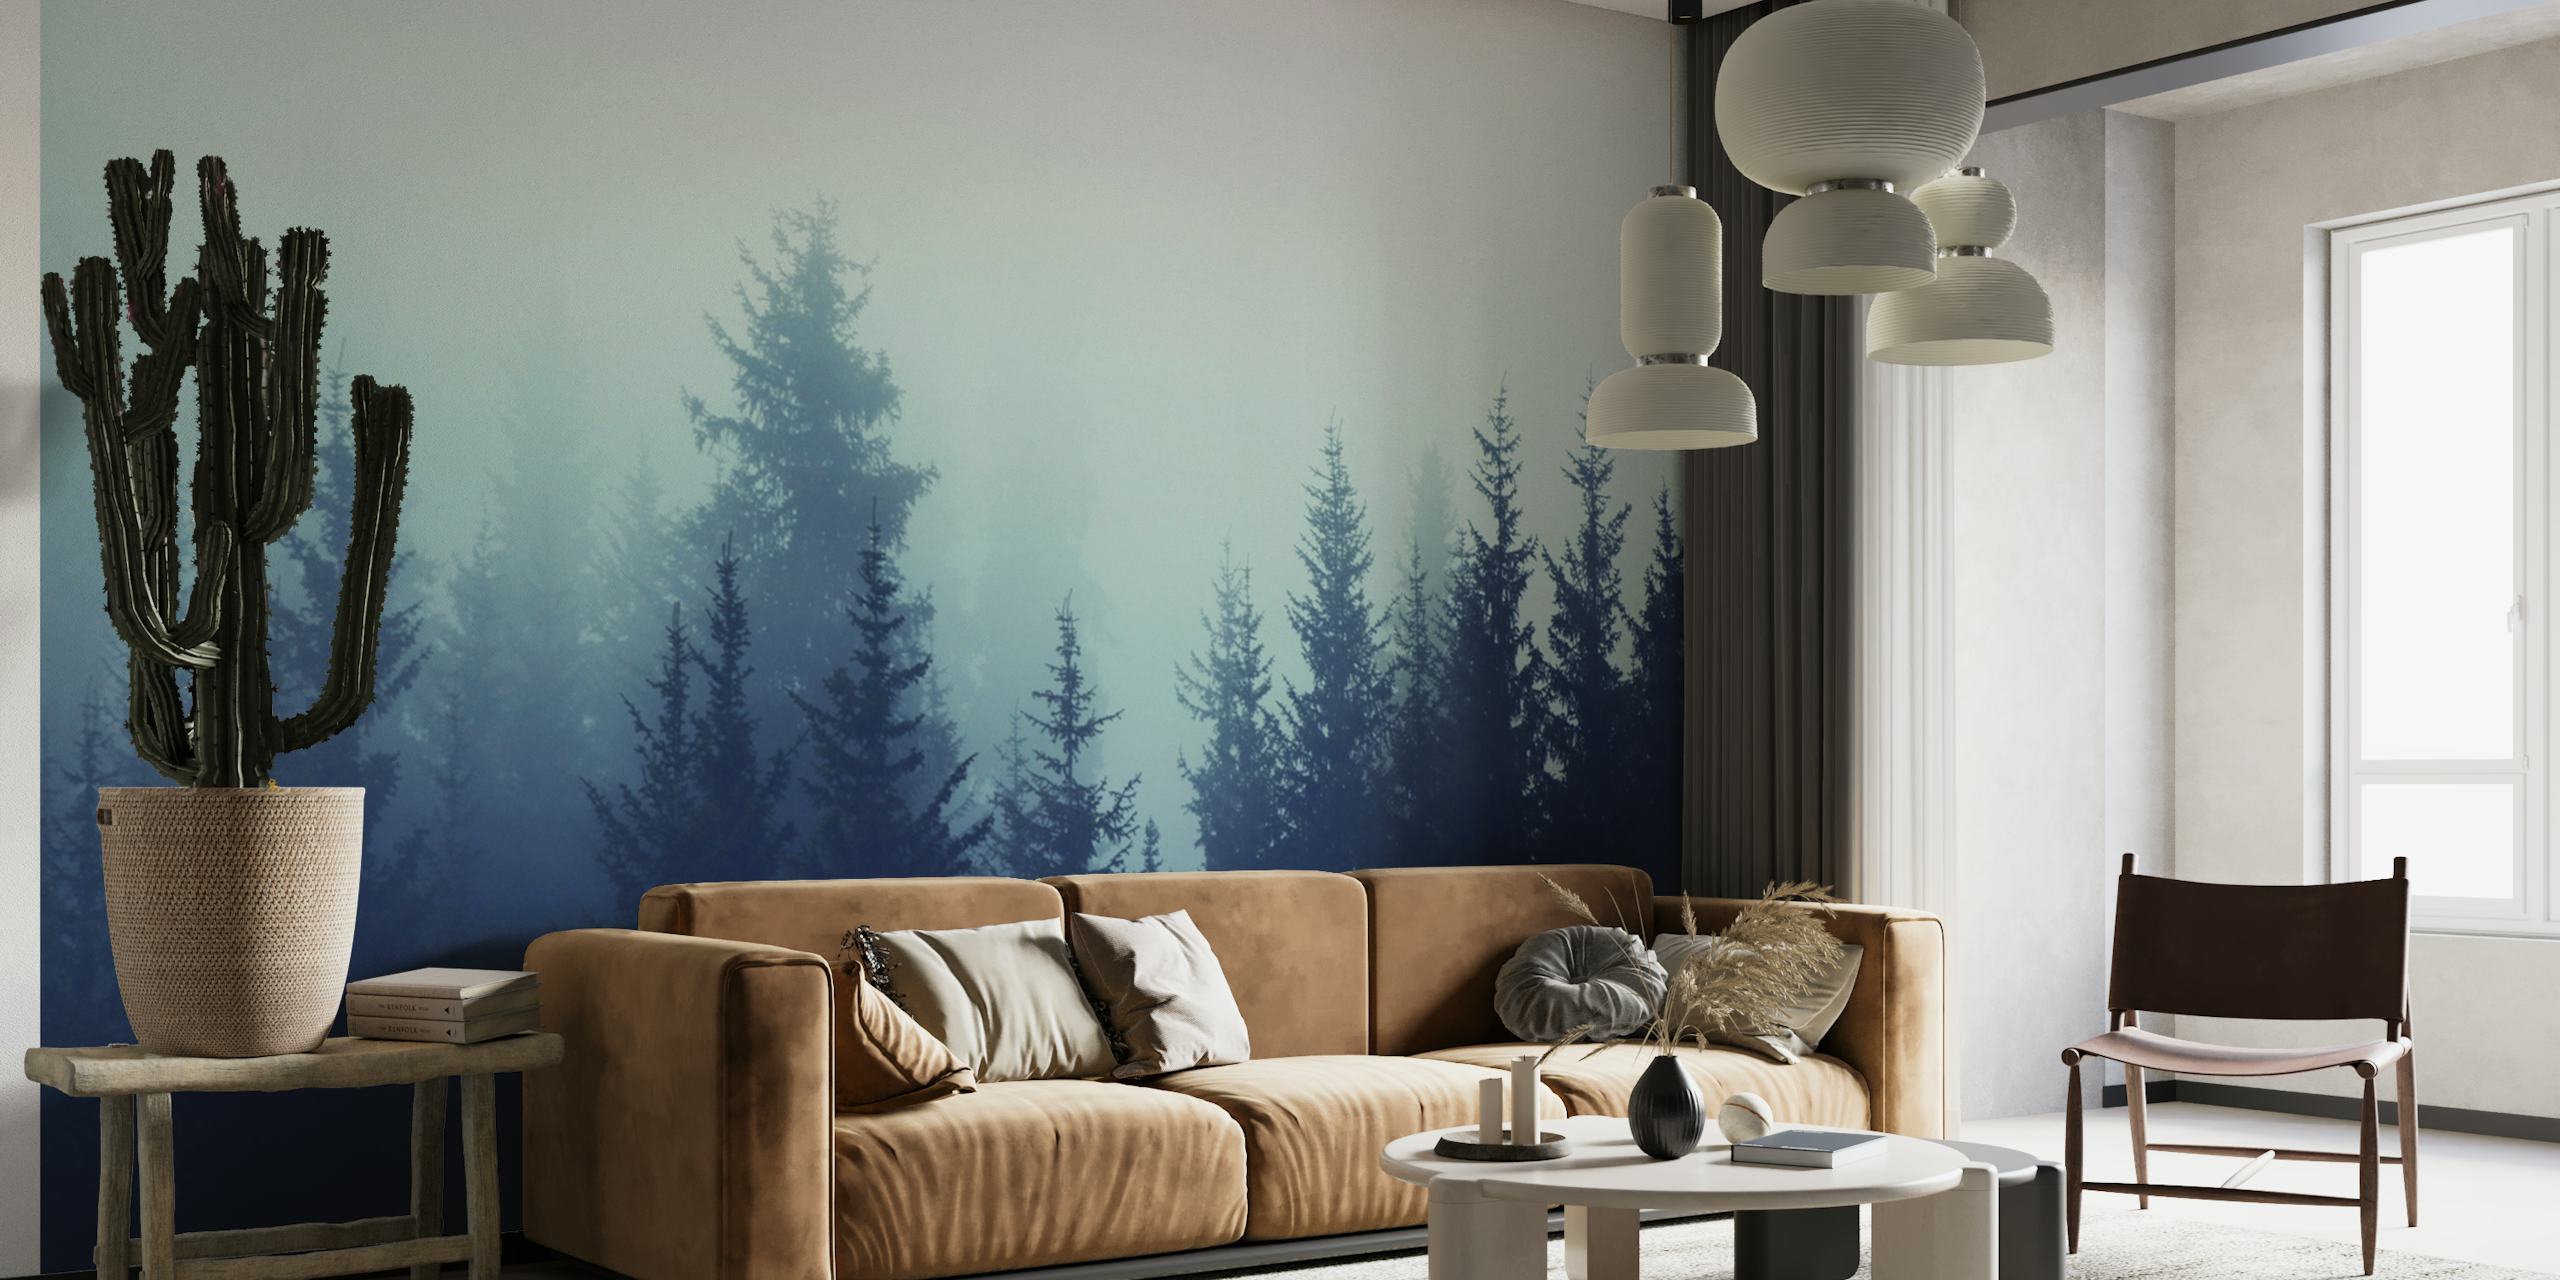 A wall mural featuring a foggy pine forest in muted tones.